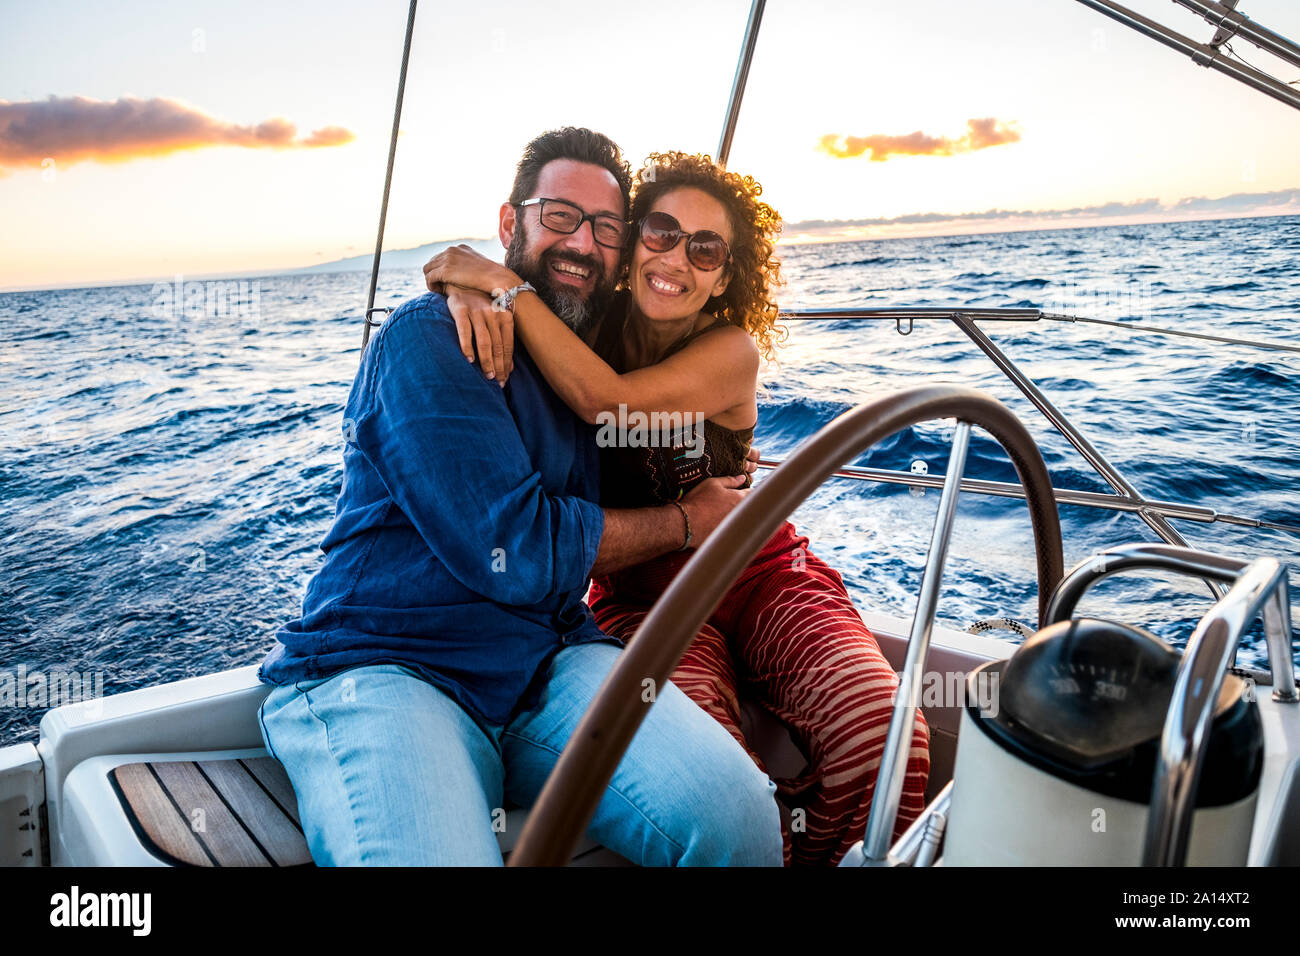 Happy people caucasian adult couple enjoy the sail boat trip on summer holiday vacation - outdoor leisure activity with ocean and sunset in. backgroun Stock Photo